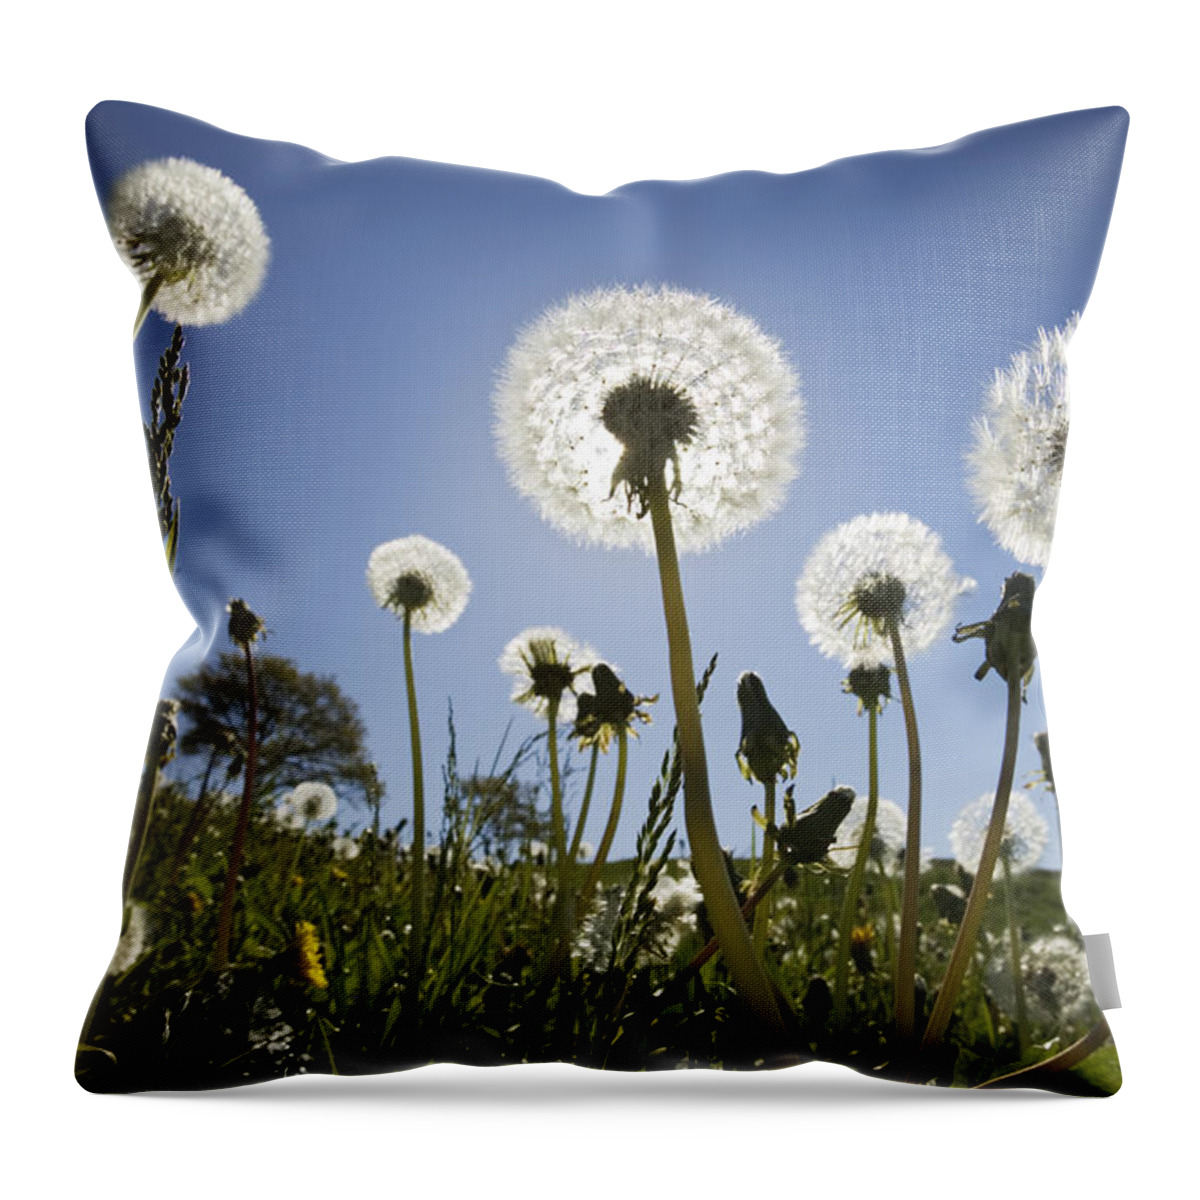 Mp Throw Pillow featuring the photograph Dandelion Taraxacum Officinale, Upper by Konrad Wothe